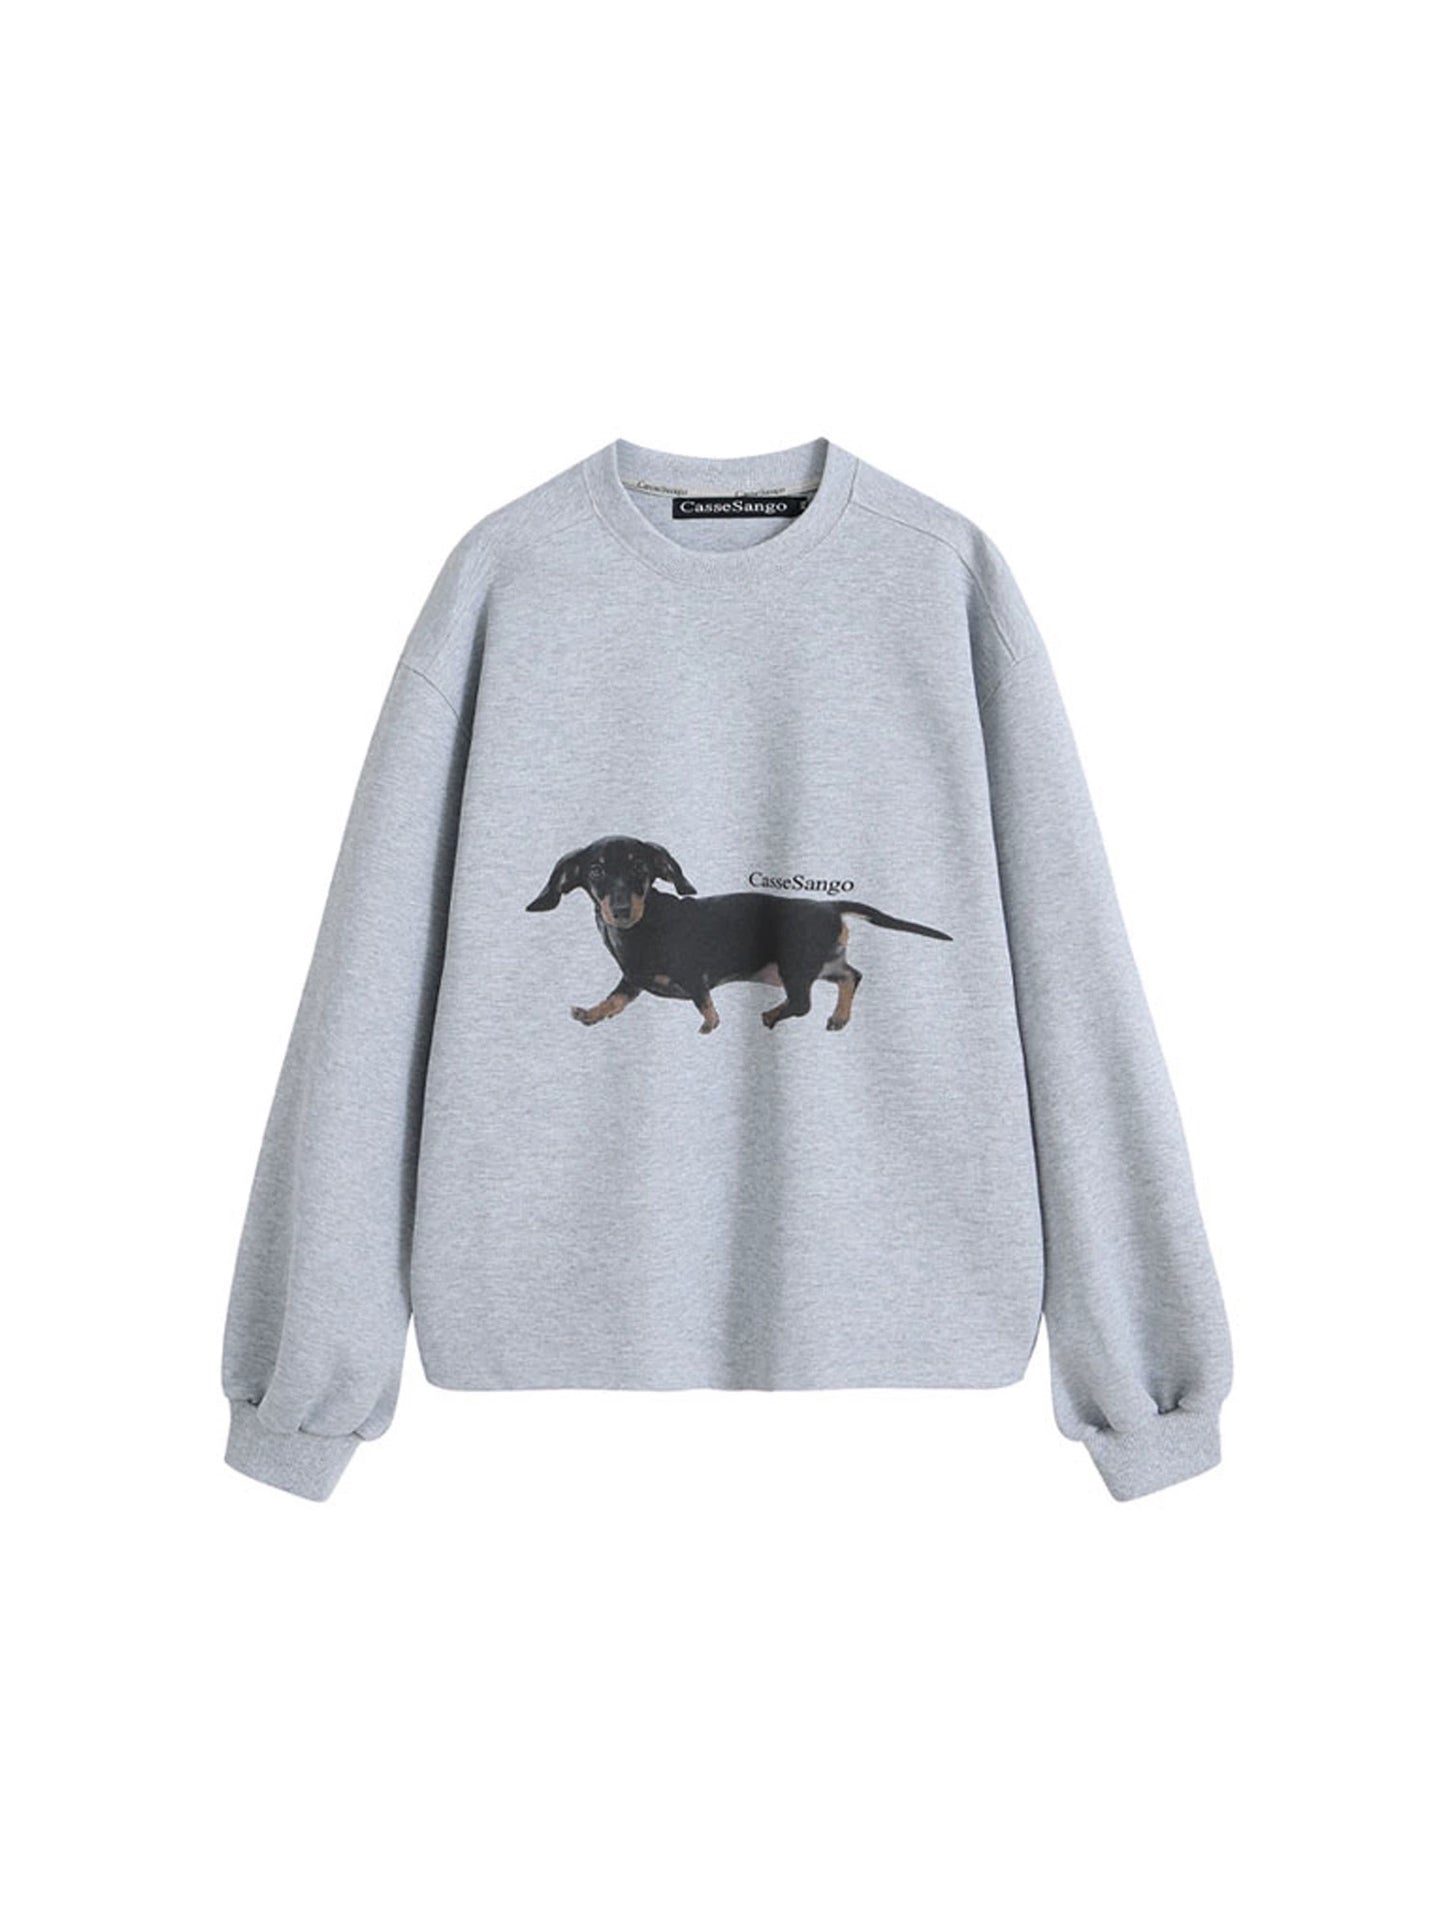 ANTERIORLOVED×CasseSango original dachshund multi-color long-sleeved loose T-shirt sweatshirt with a relaxed feeling